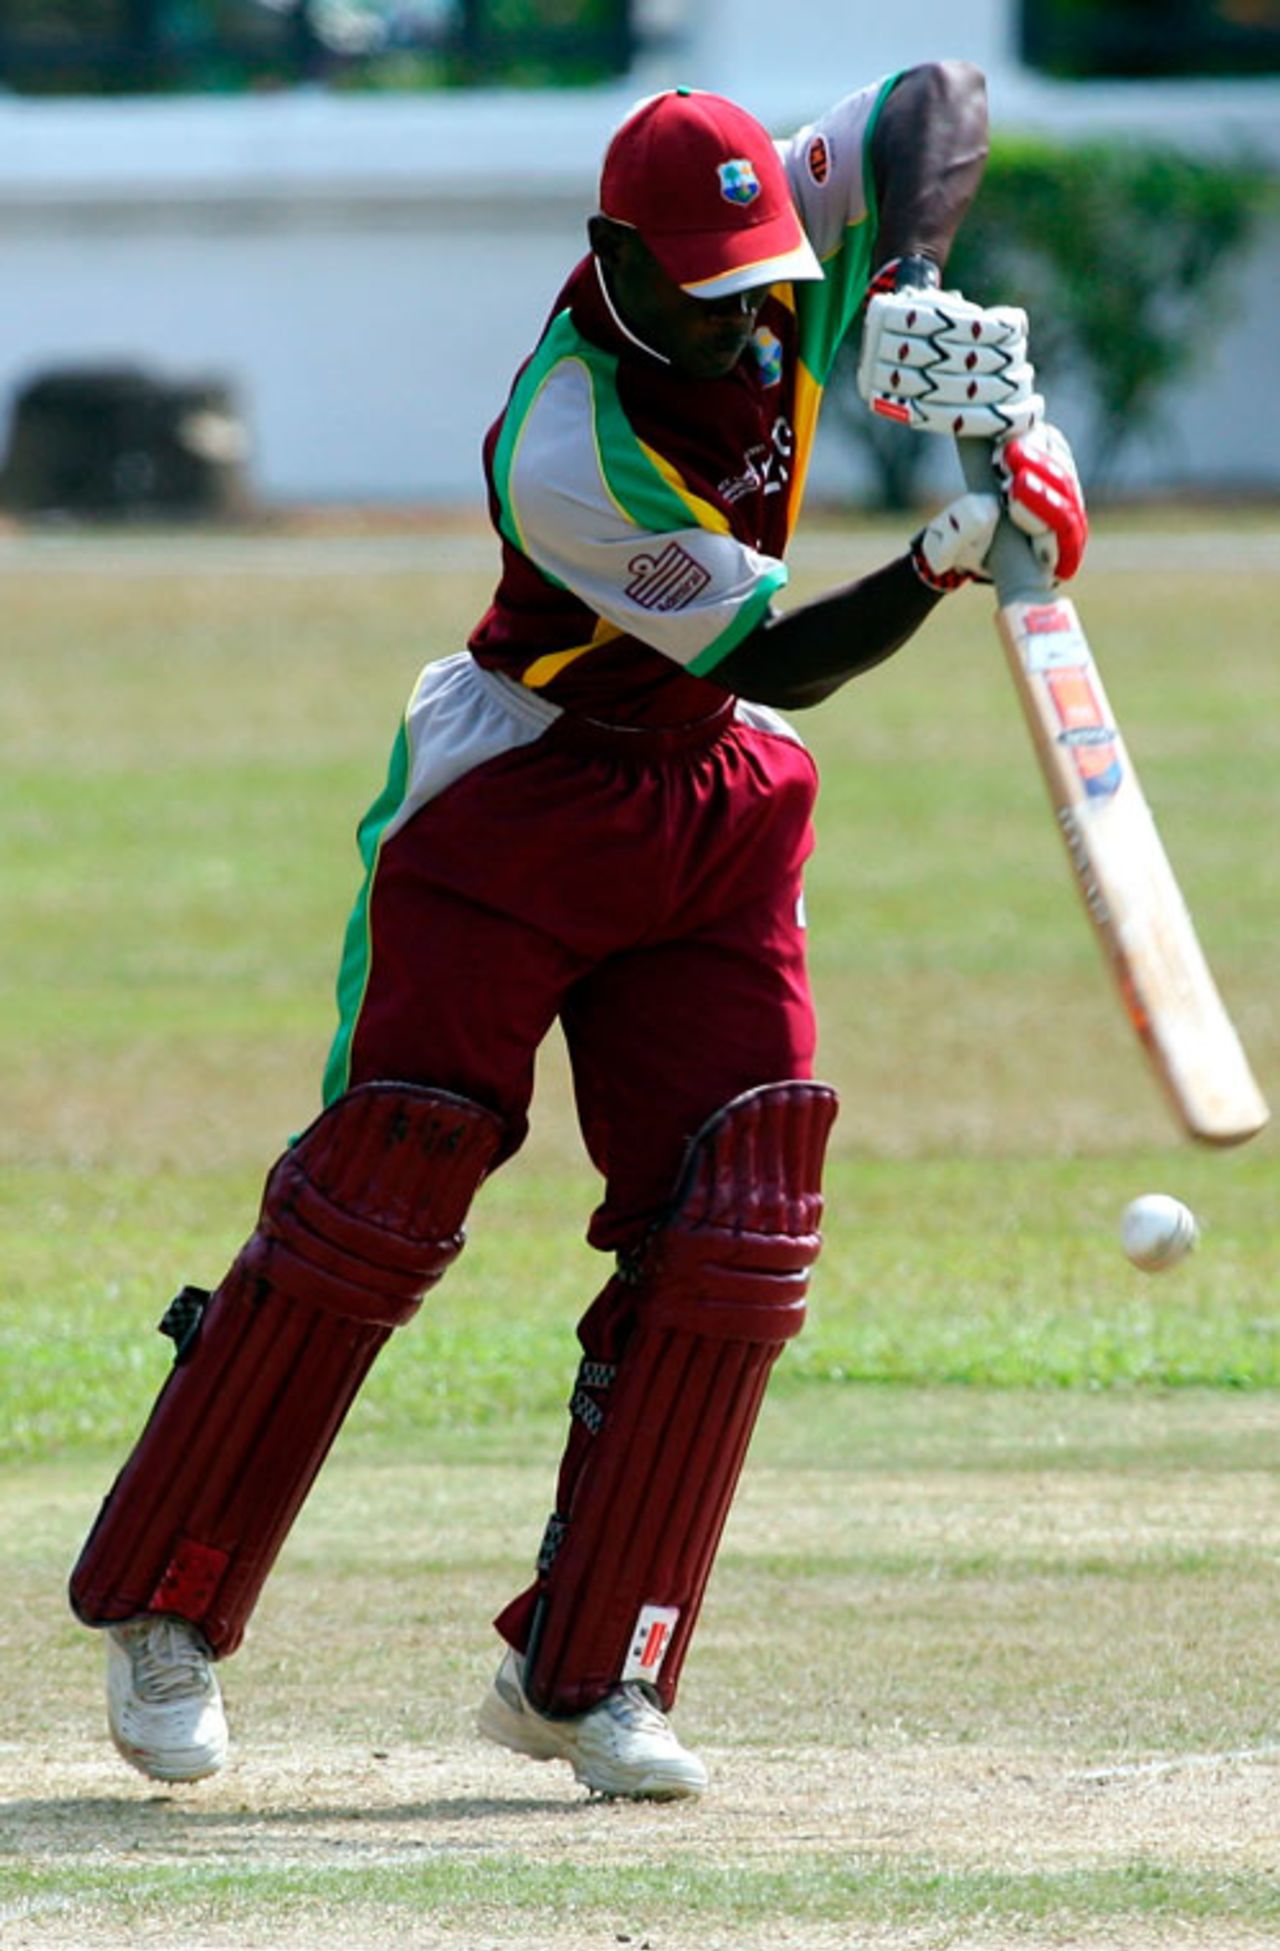 Andre Creary defends off the back foot, Papua New Guinea Under-19s v West Indies Under-19s, Under-19 World Cup, Kuala Lumpur, February 20, 2008